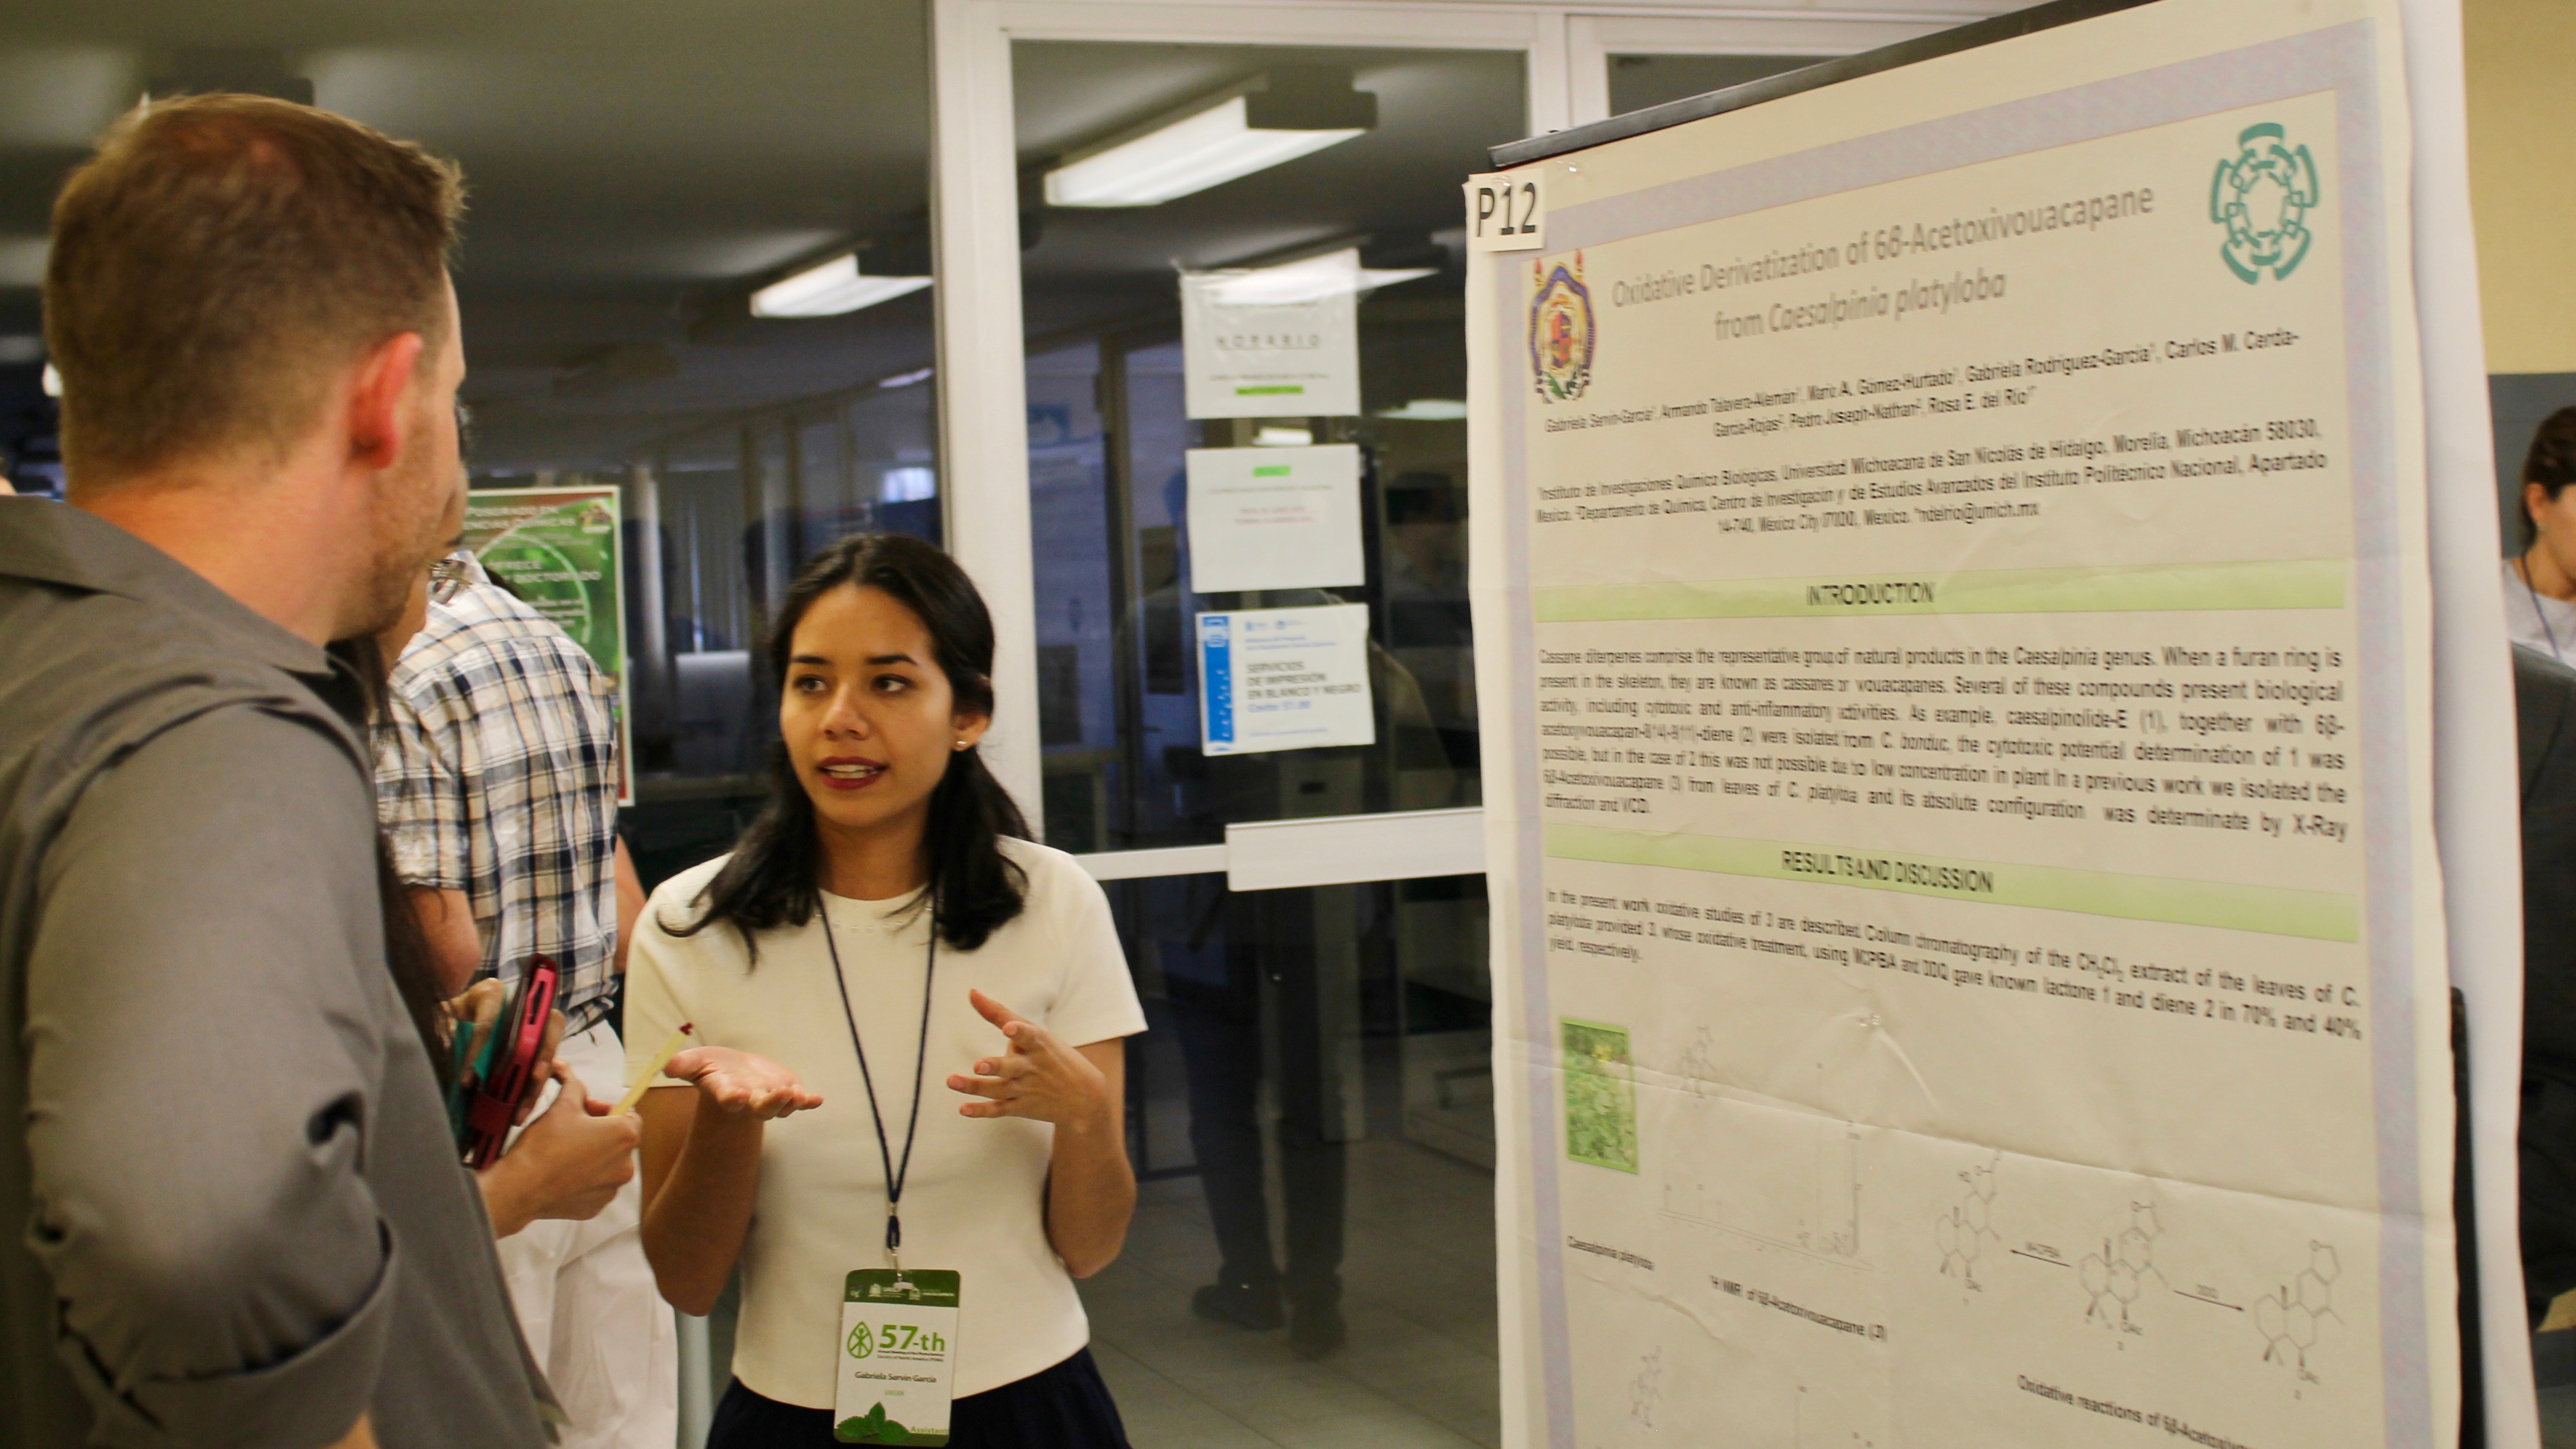 Zerbe at a poster session with international students from Mexico